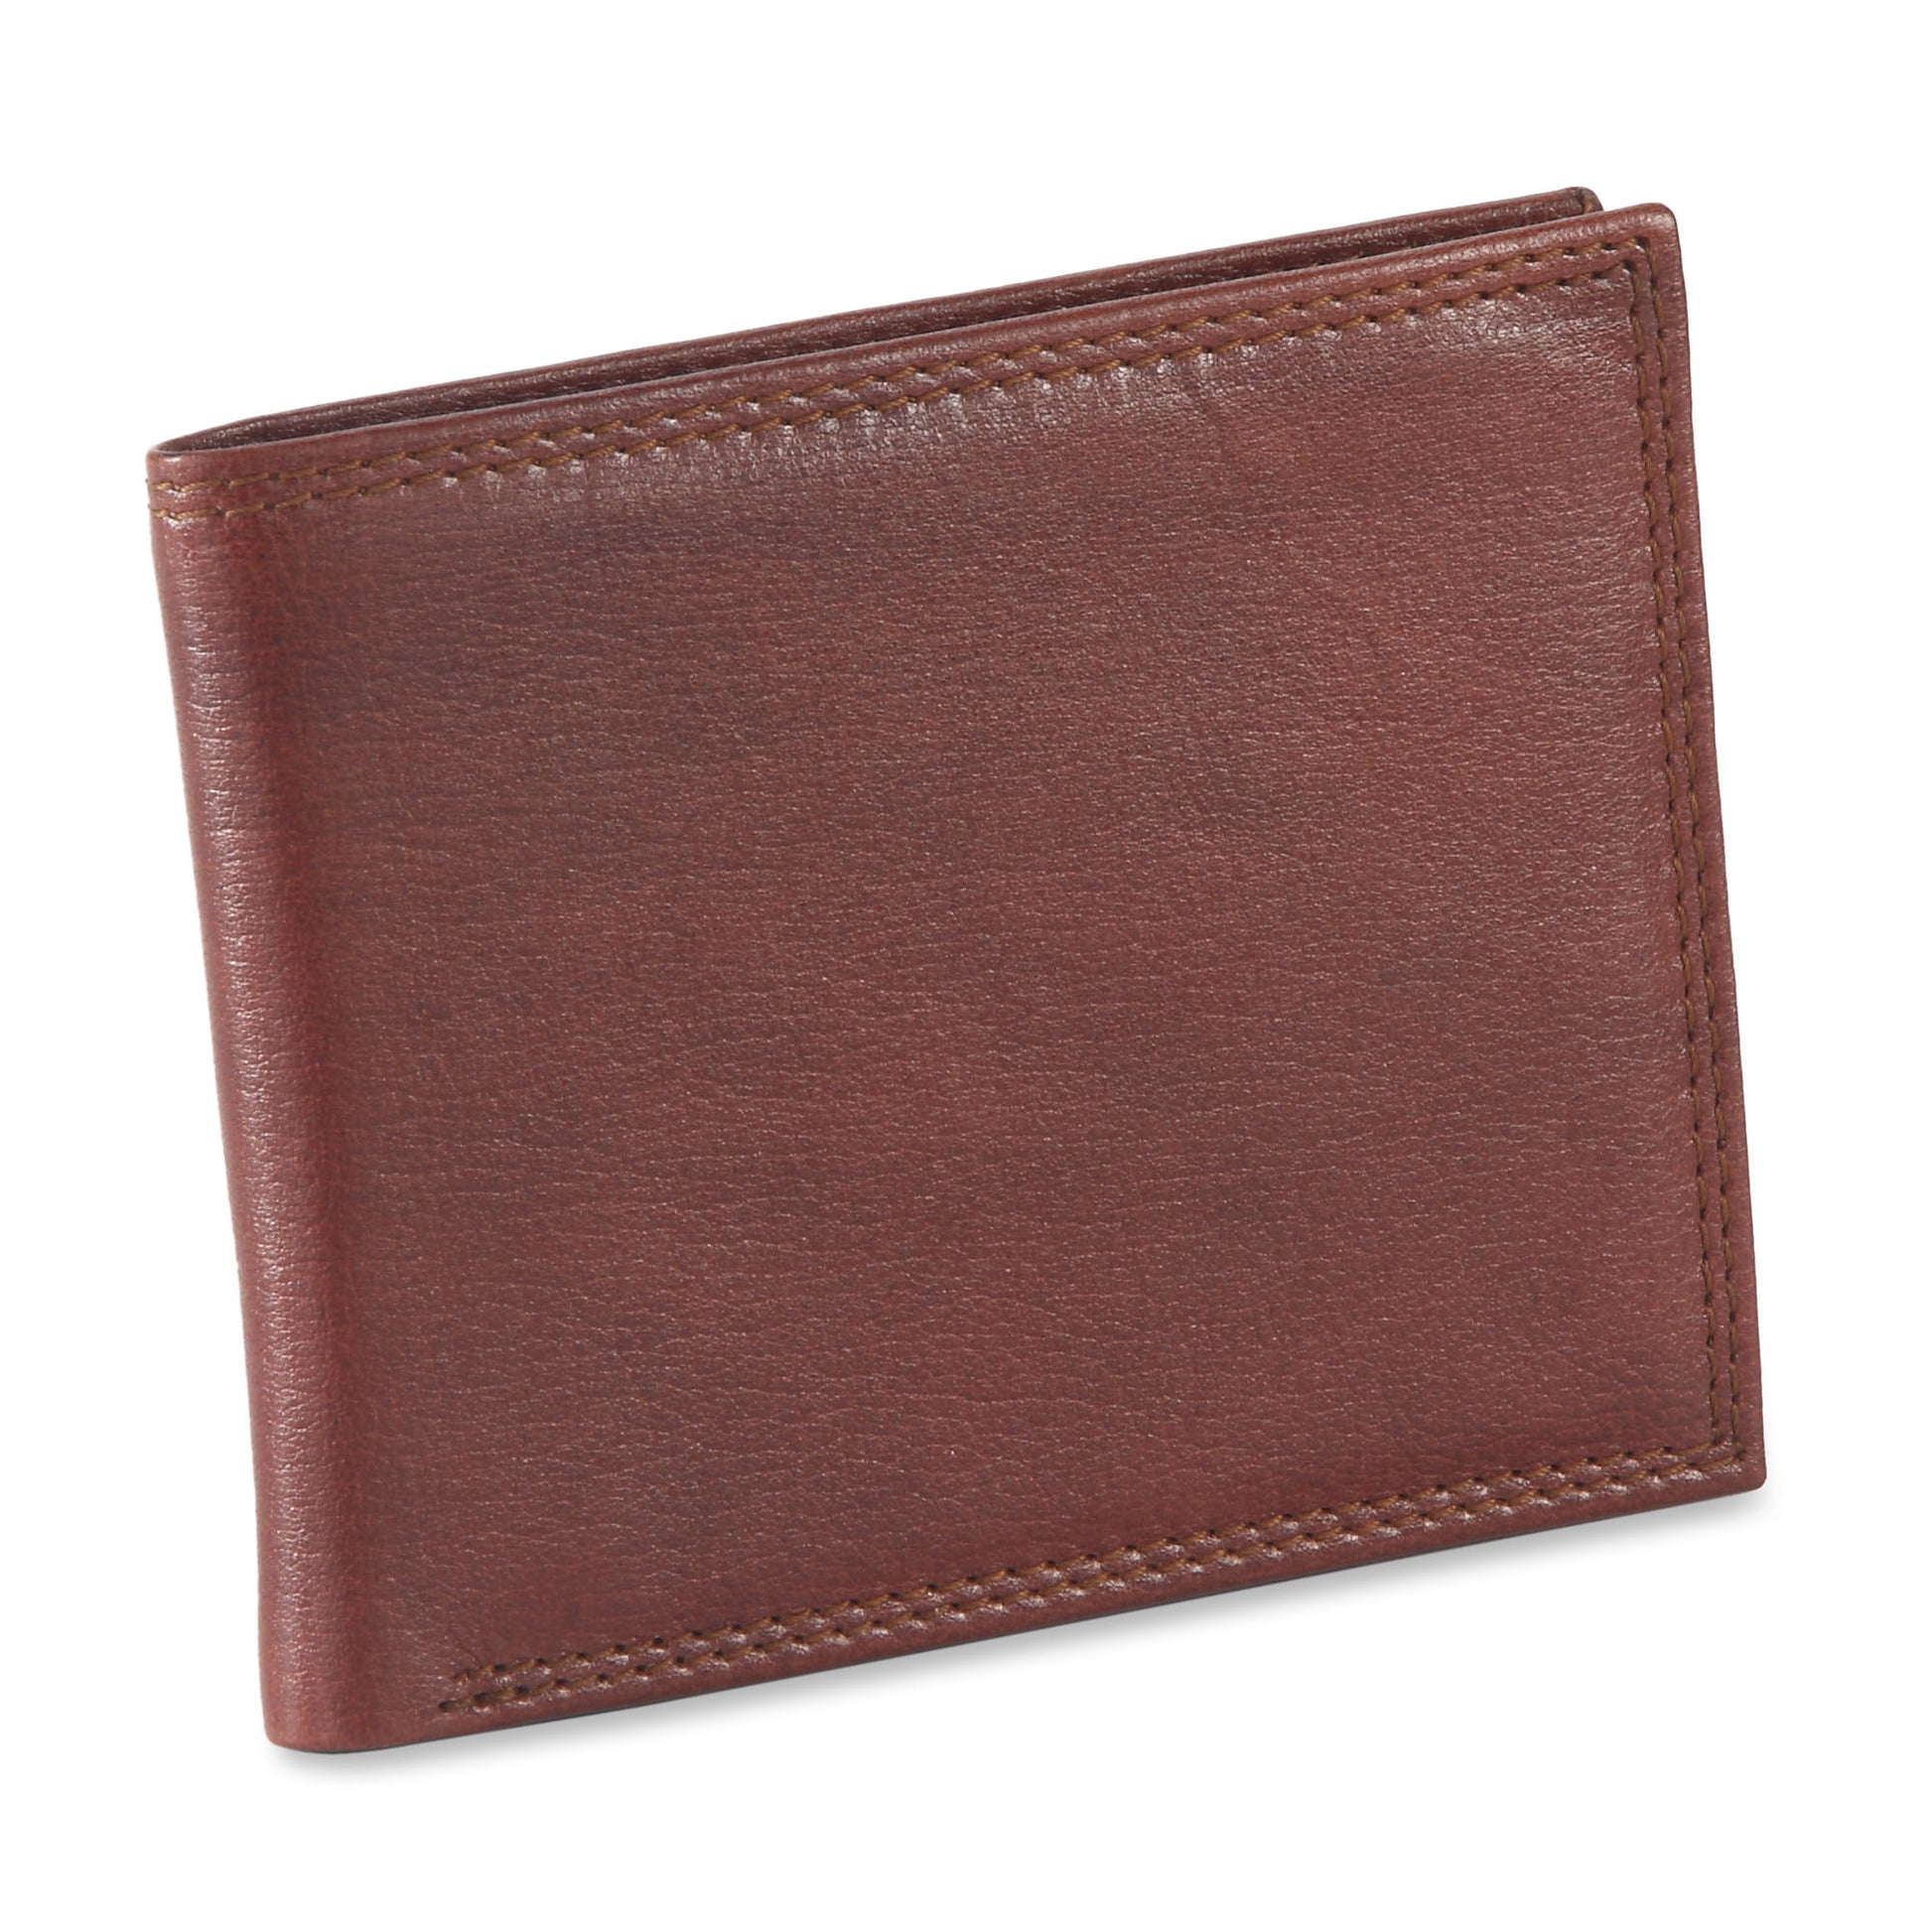 301722 slim bifold wallet in dark tan or brandy color cow leather with 2 tone effect - closed view